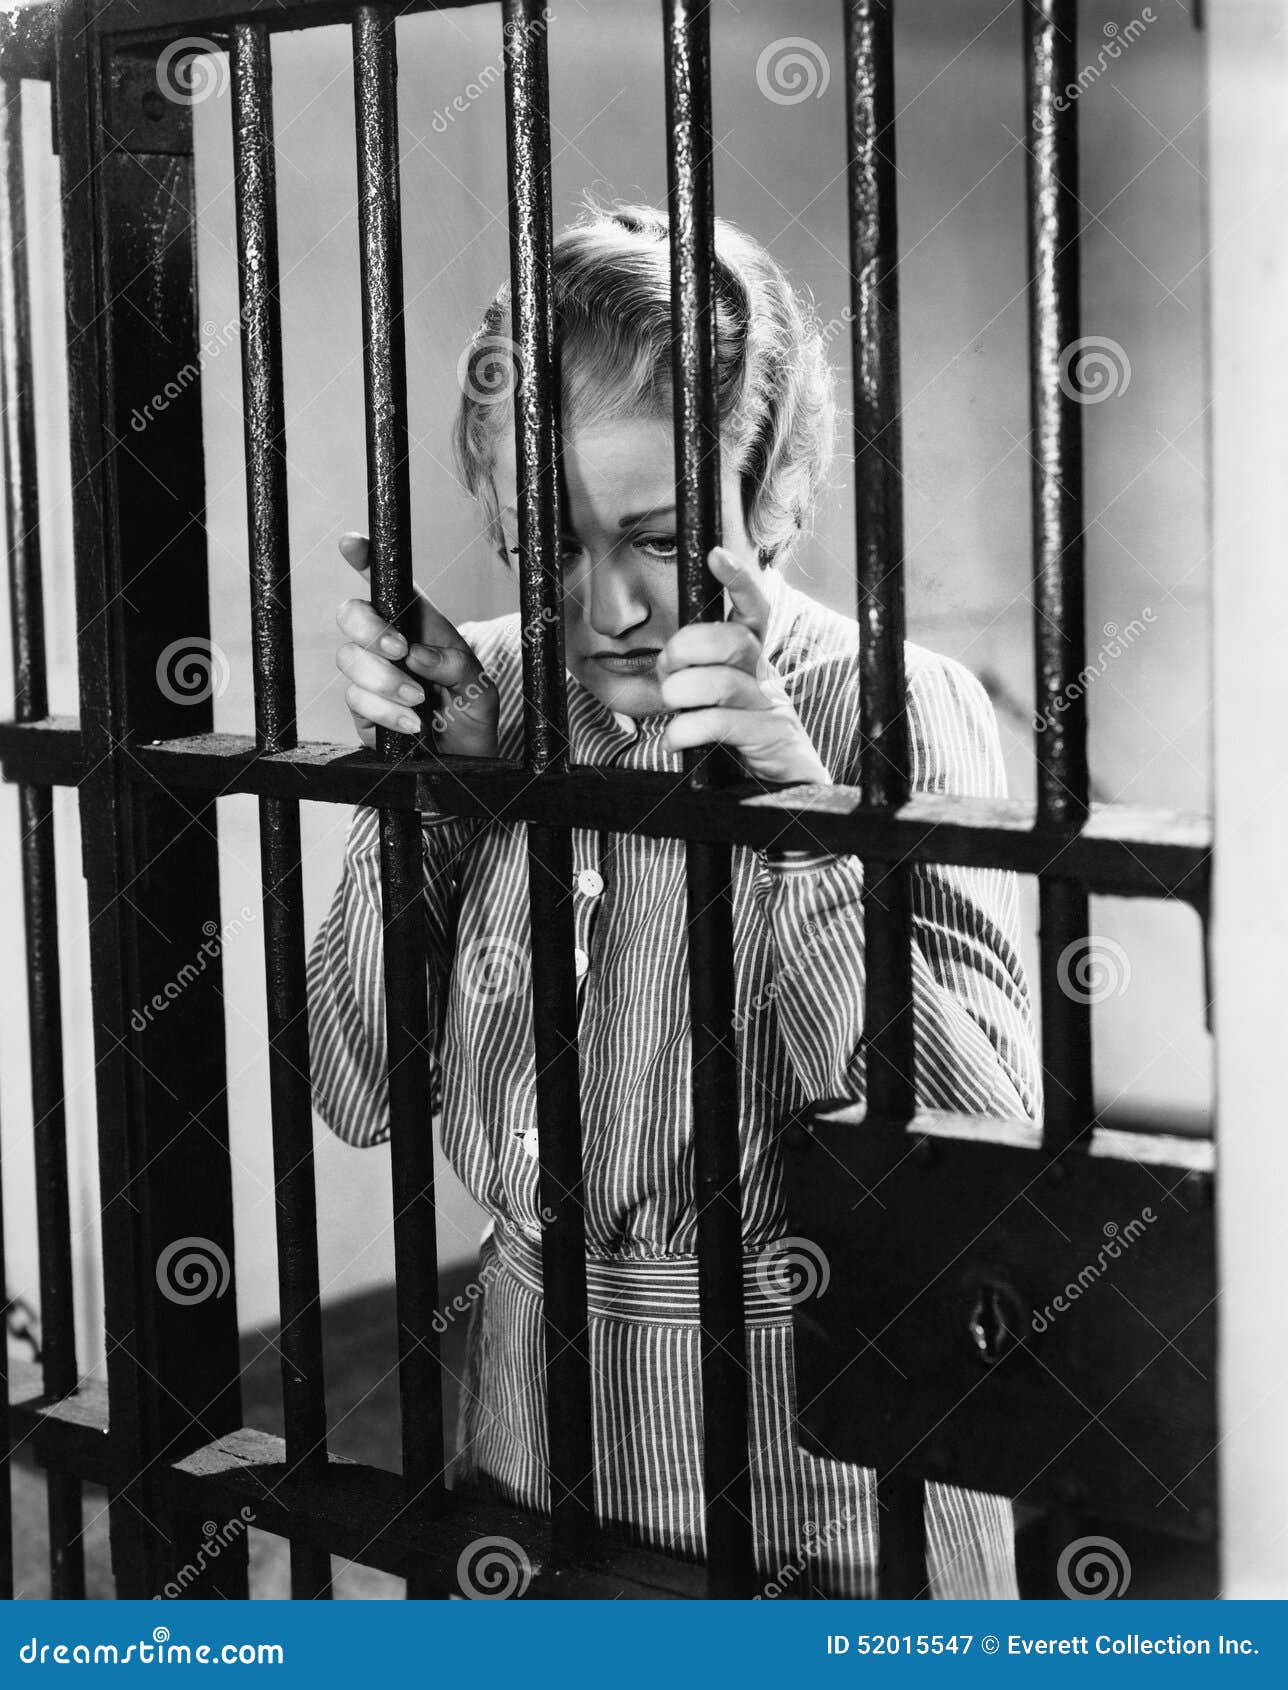 young woman standing in a prison cell